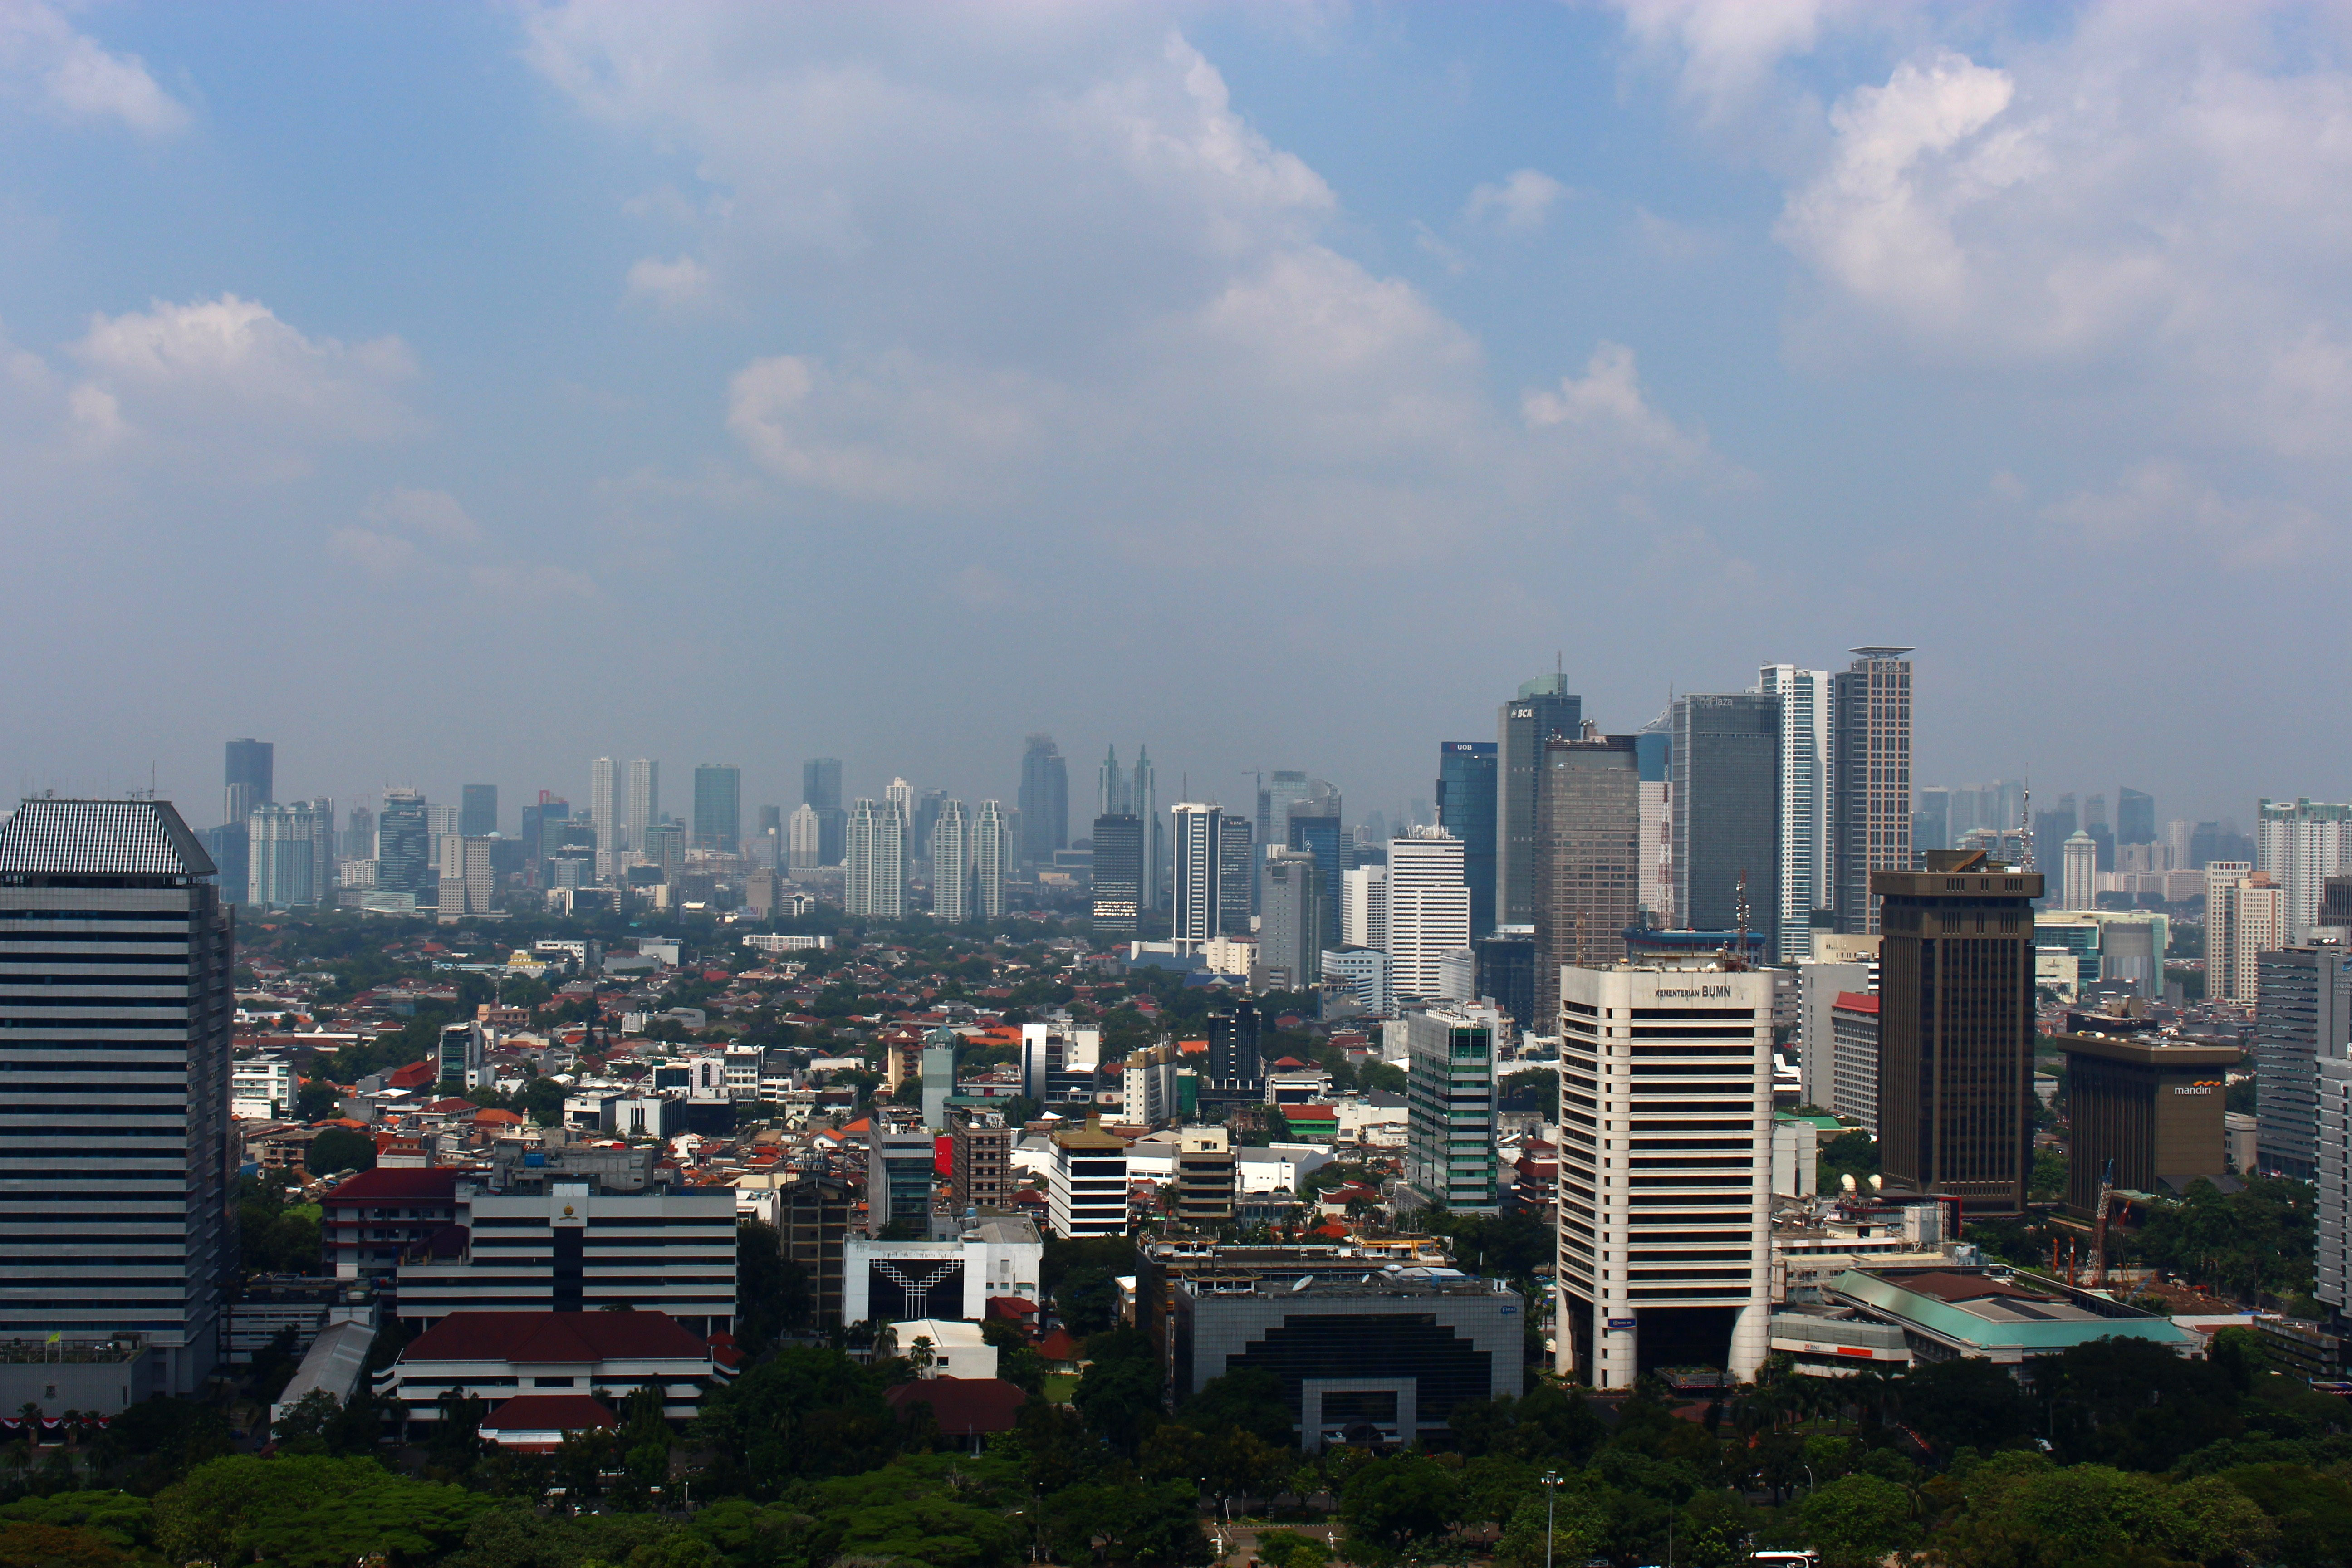 Jakarta cityscape and skyline in Indonesia image - Free stock photo